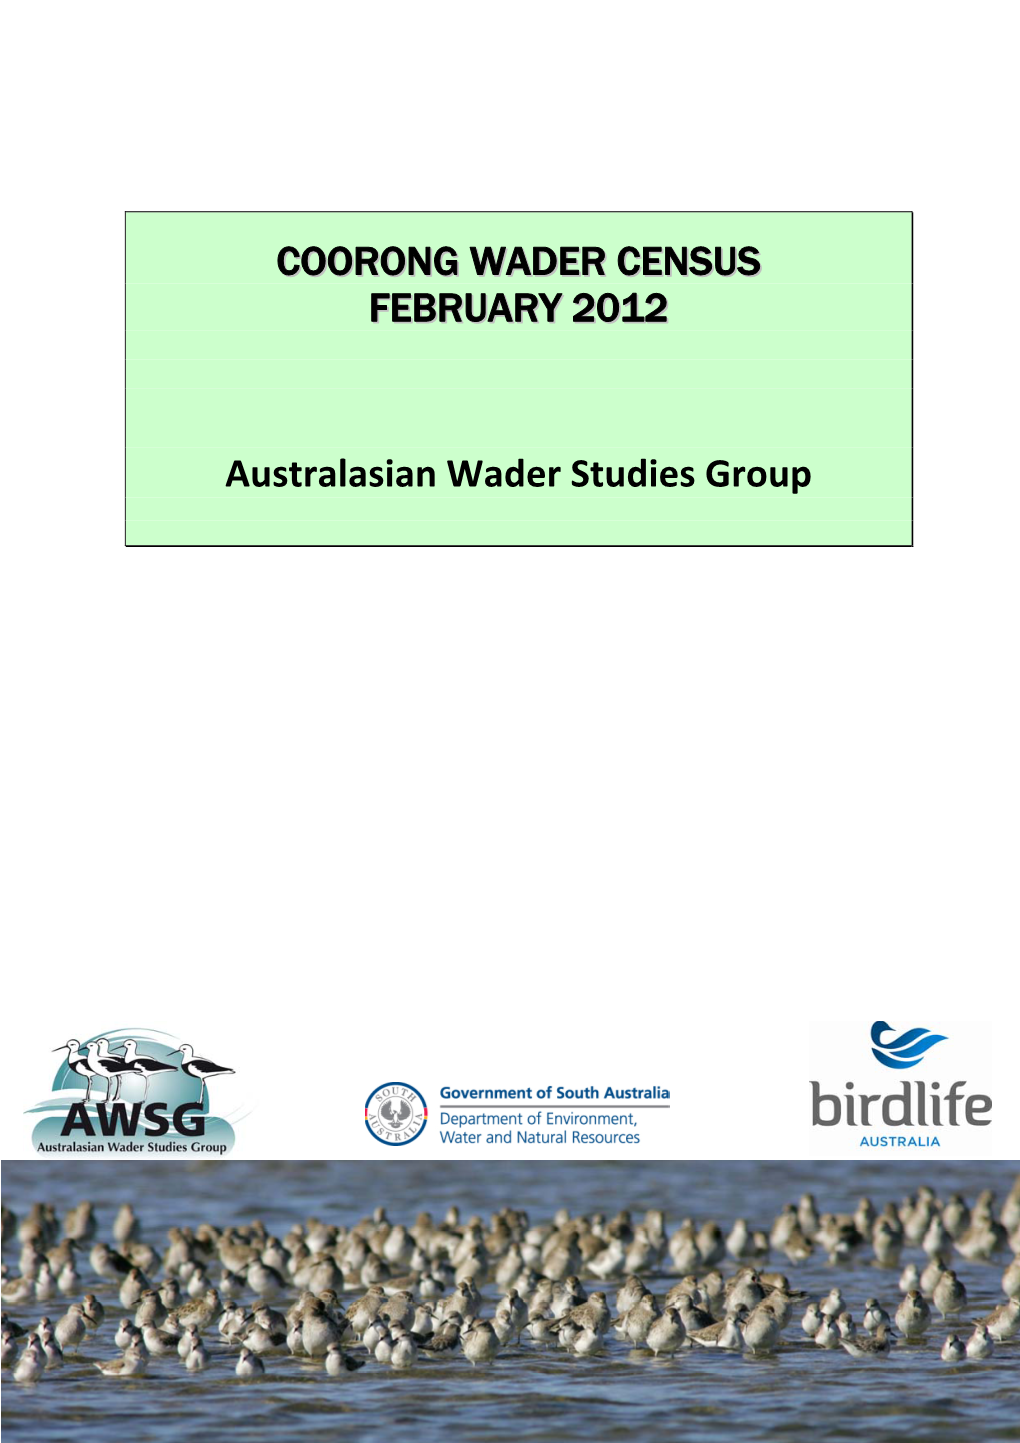 Wader Surveys in the Coorong & S